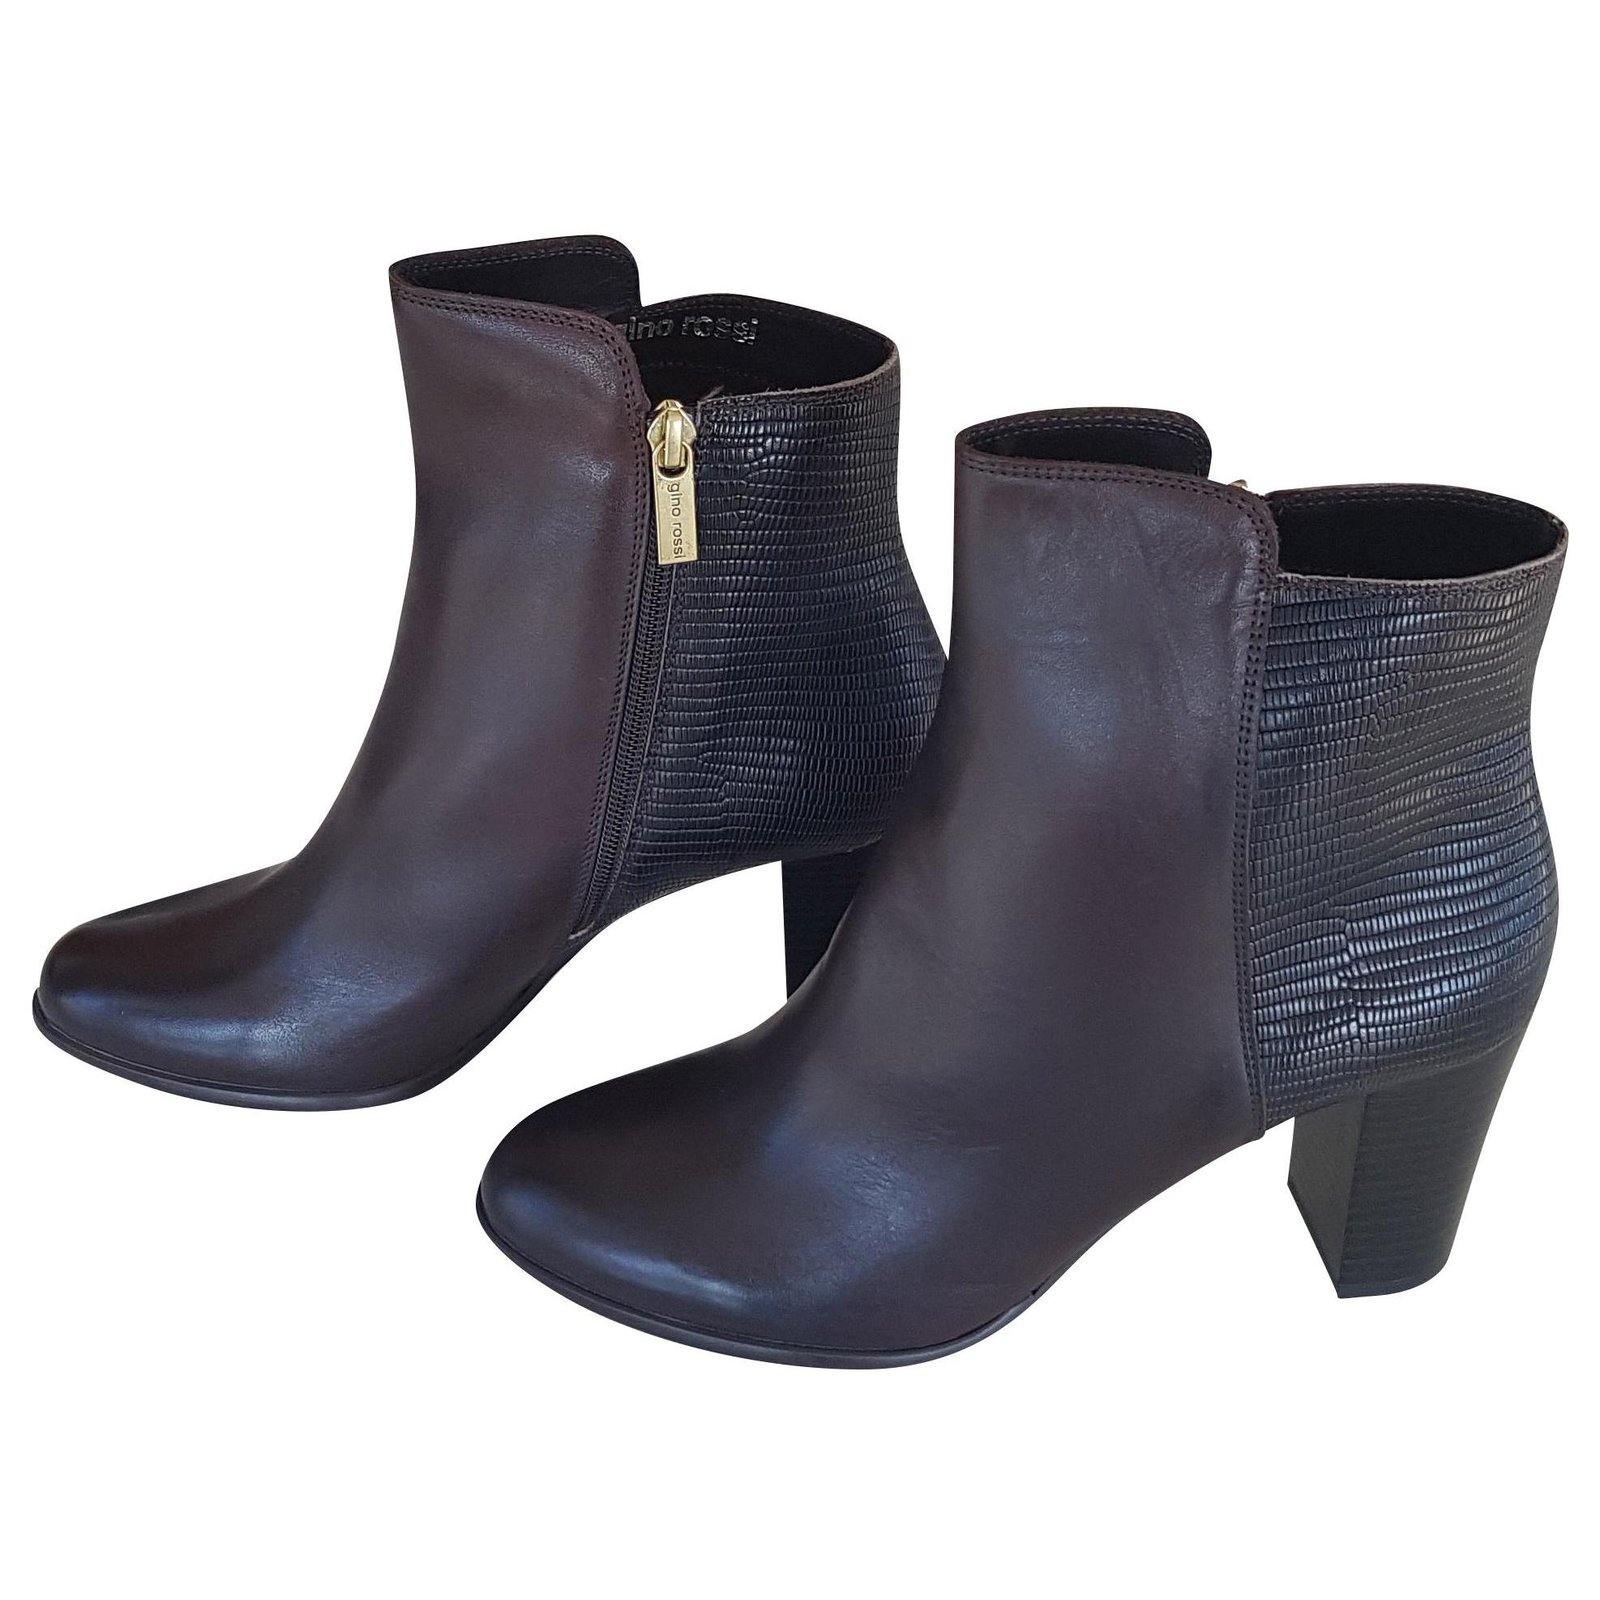 Gino Rossi Gino Rossi boots. Ankle 